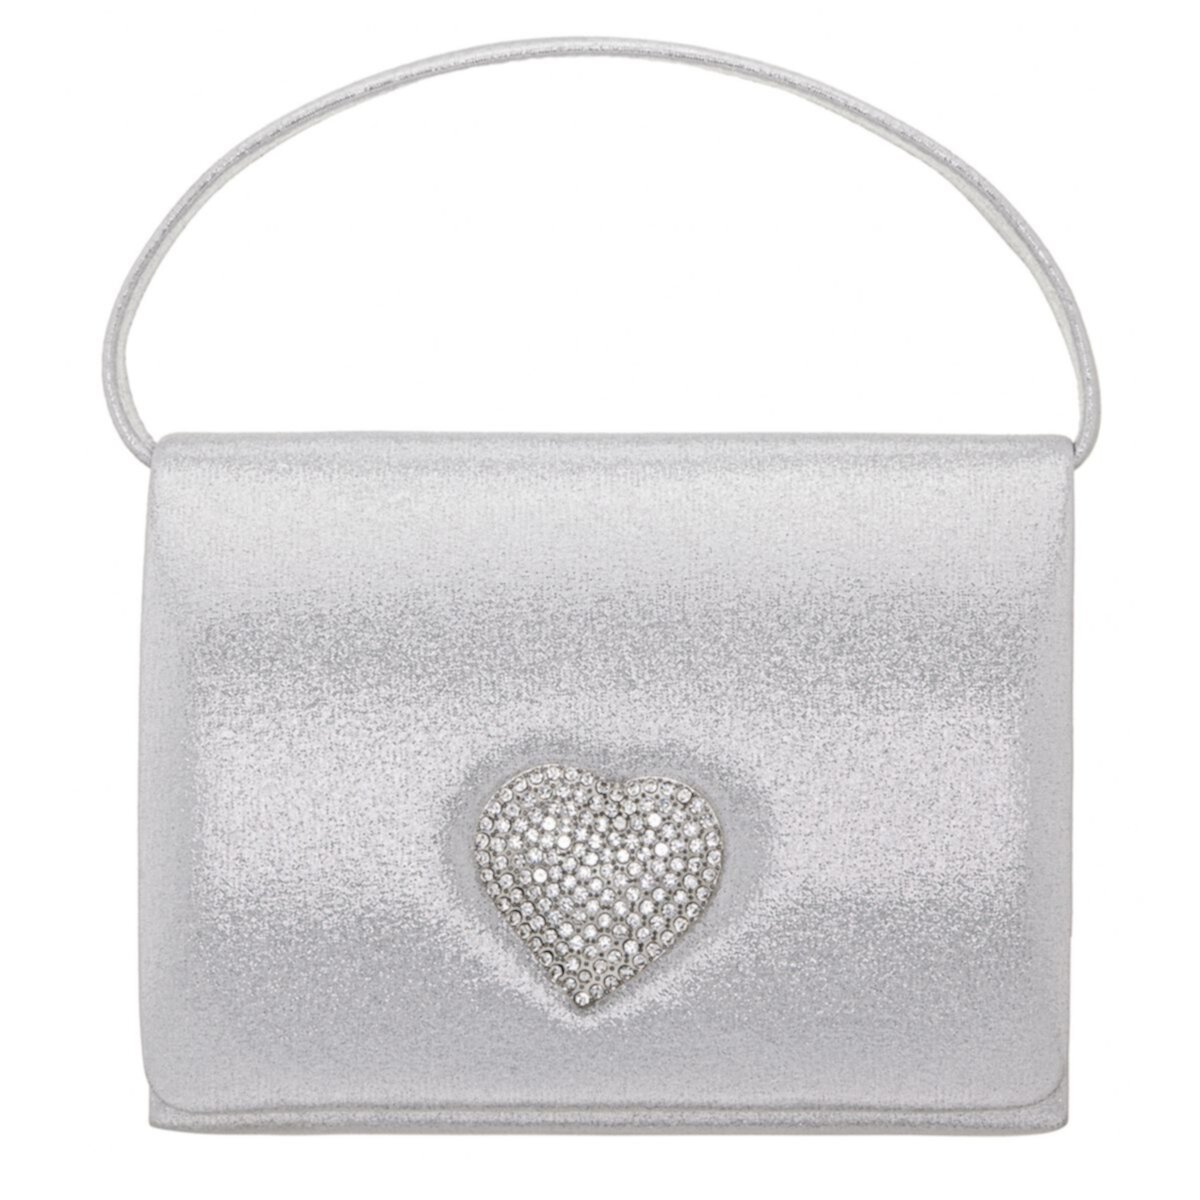 Touch of Nina M-Amour Rhinestone Heart Clutch Touch of Nina